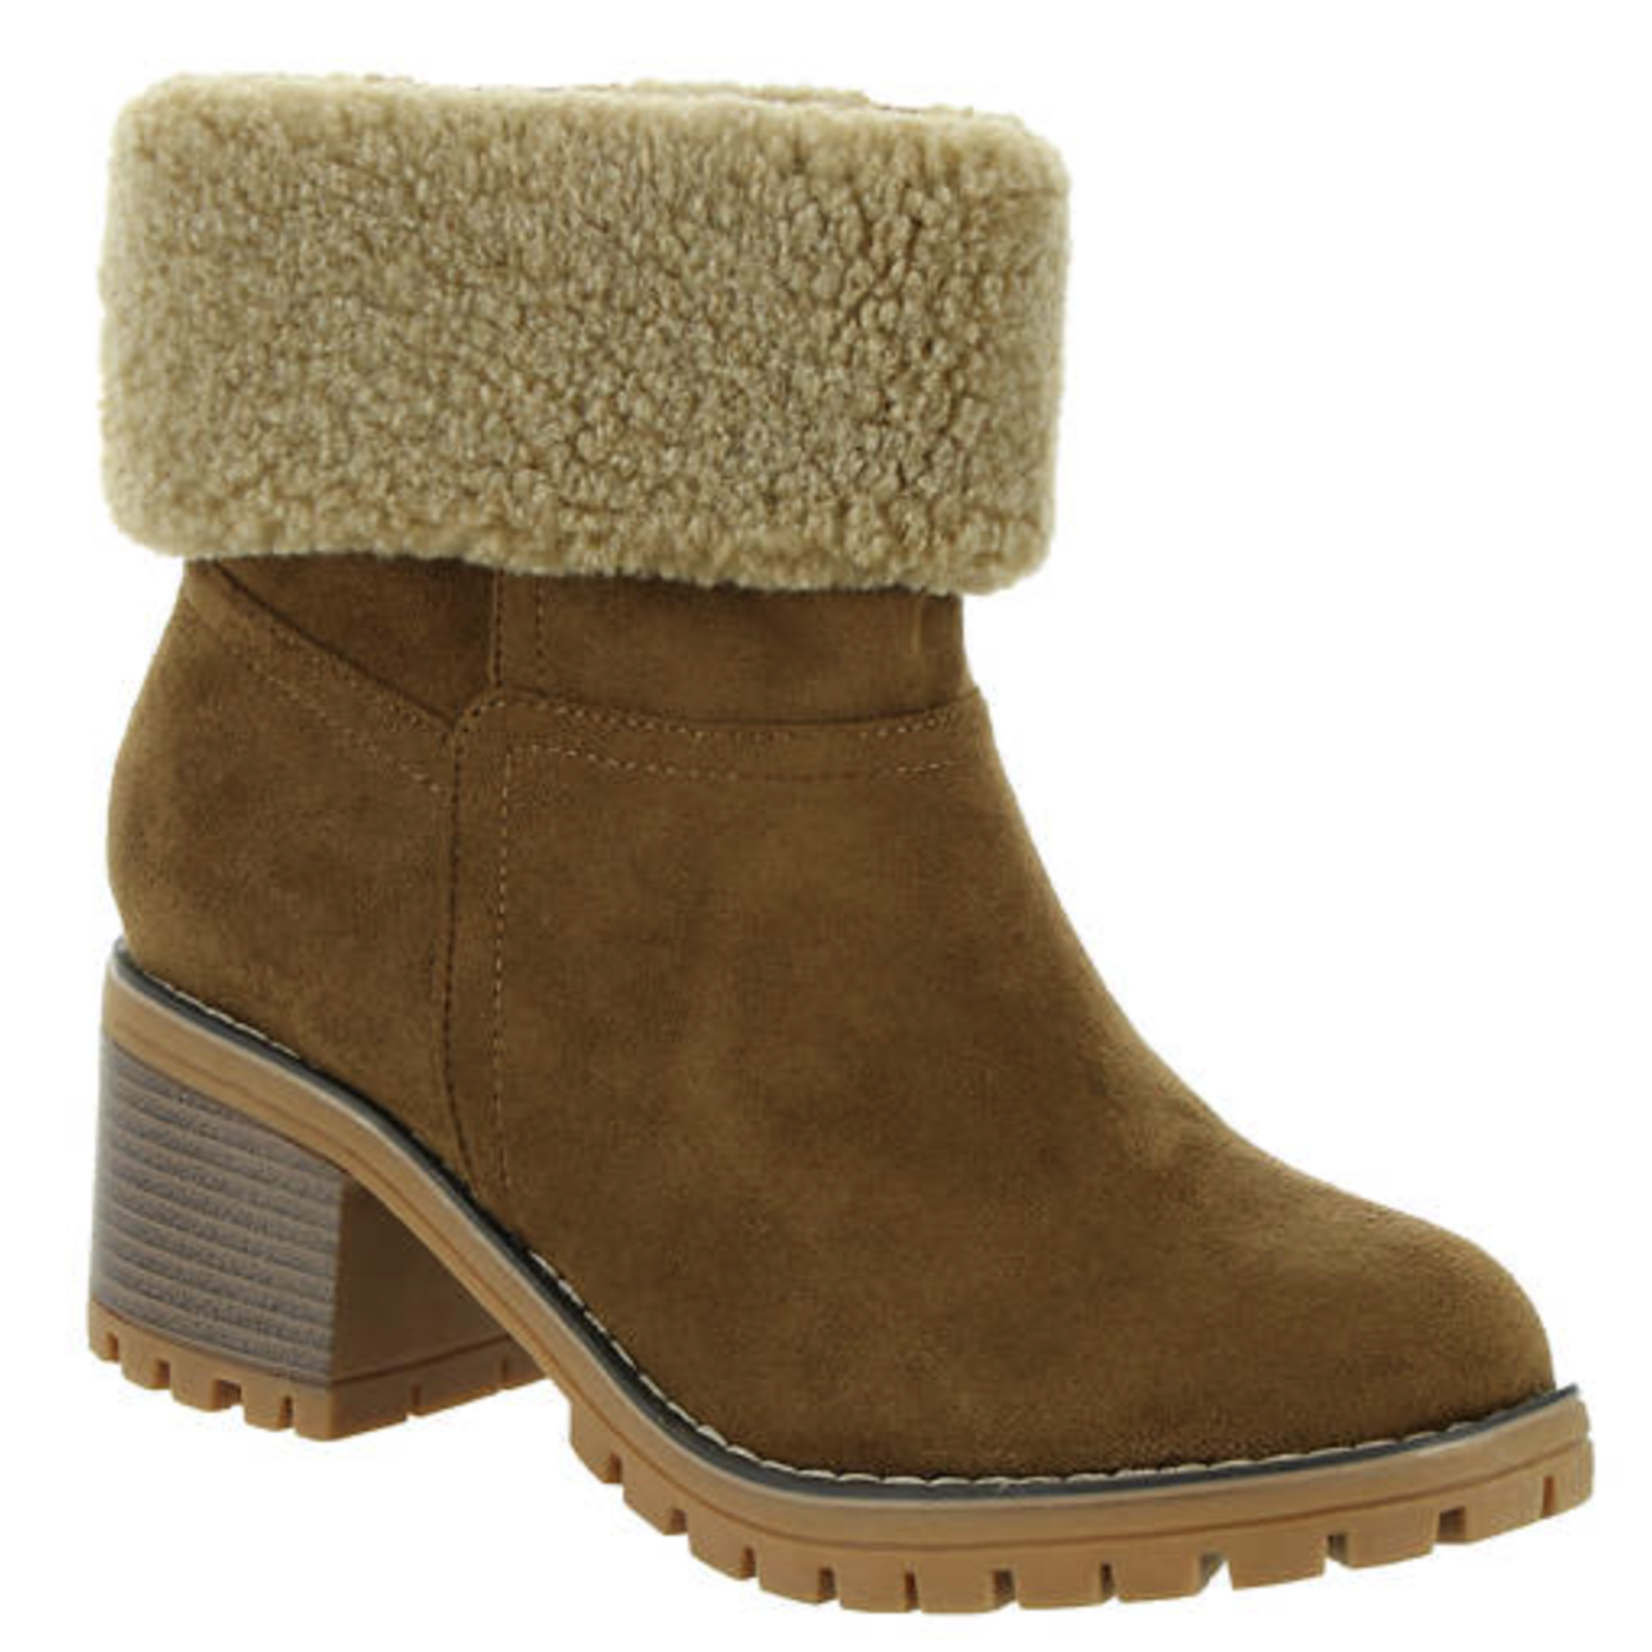 Corkys Corky's Cotton Fur Lined Boot